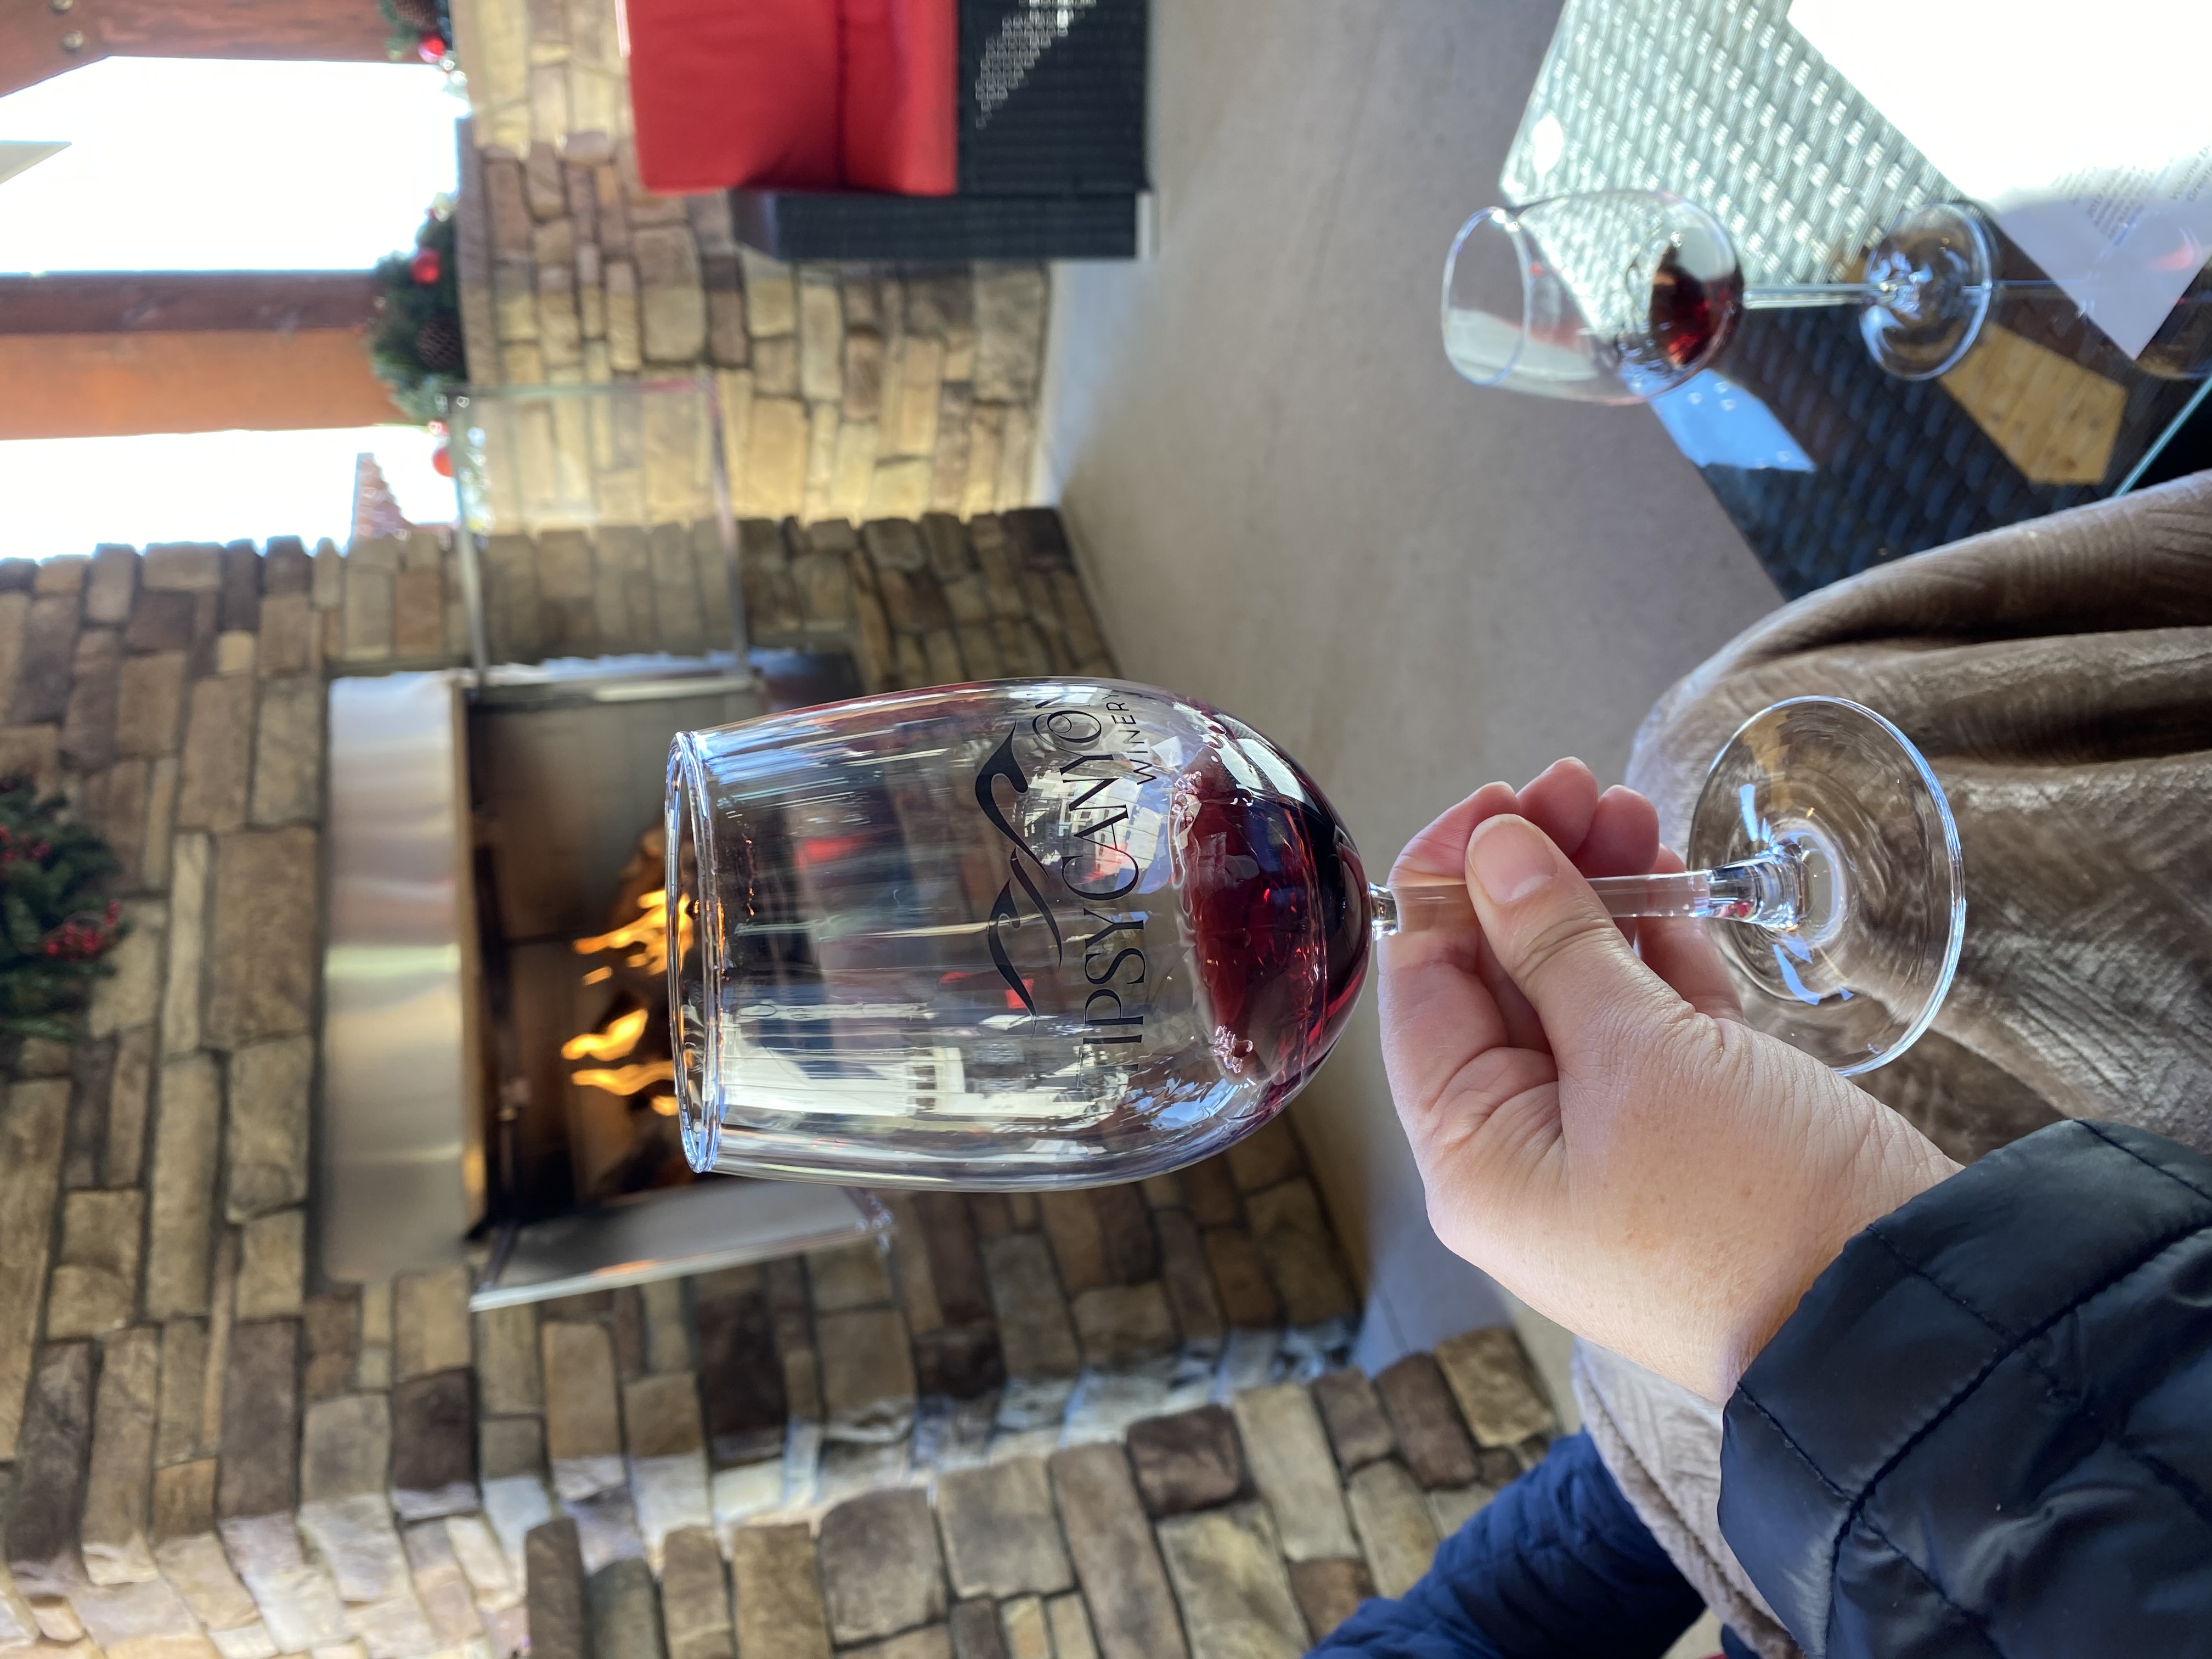 Wine glass with red wine and stone fireplace in background